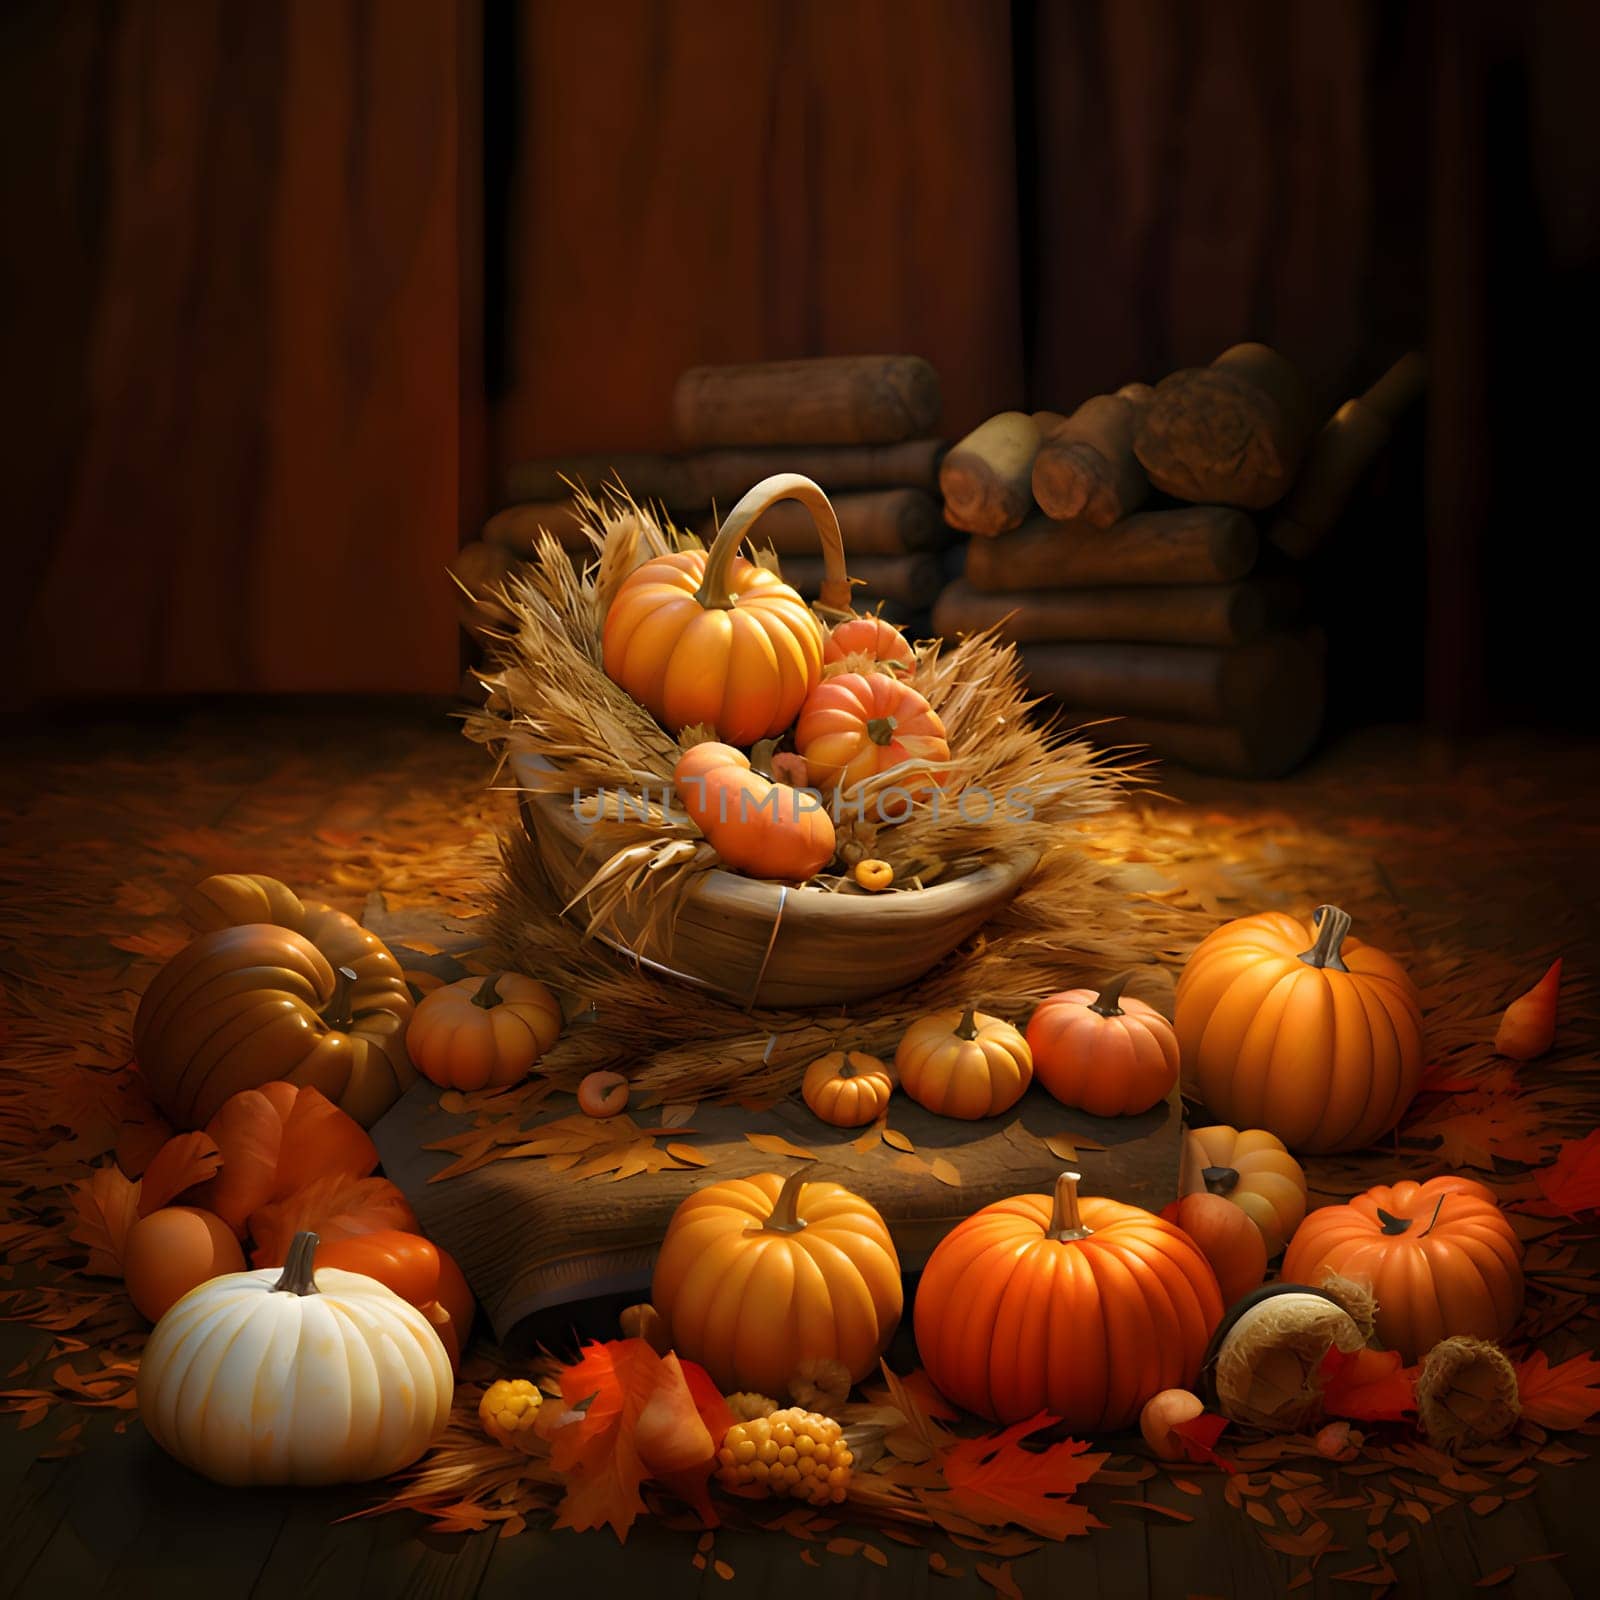 On wooden boards, barn orange pumpkins, autumn scattered leaves, wicker baskets, and in them grain and pumpkins. Pumpkin as a dish of thanksgiving for the harvest. by ThemesS